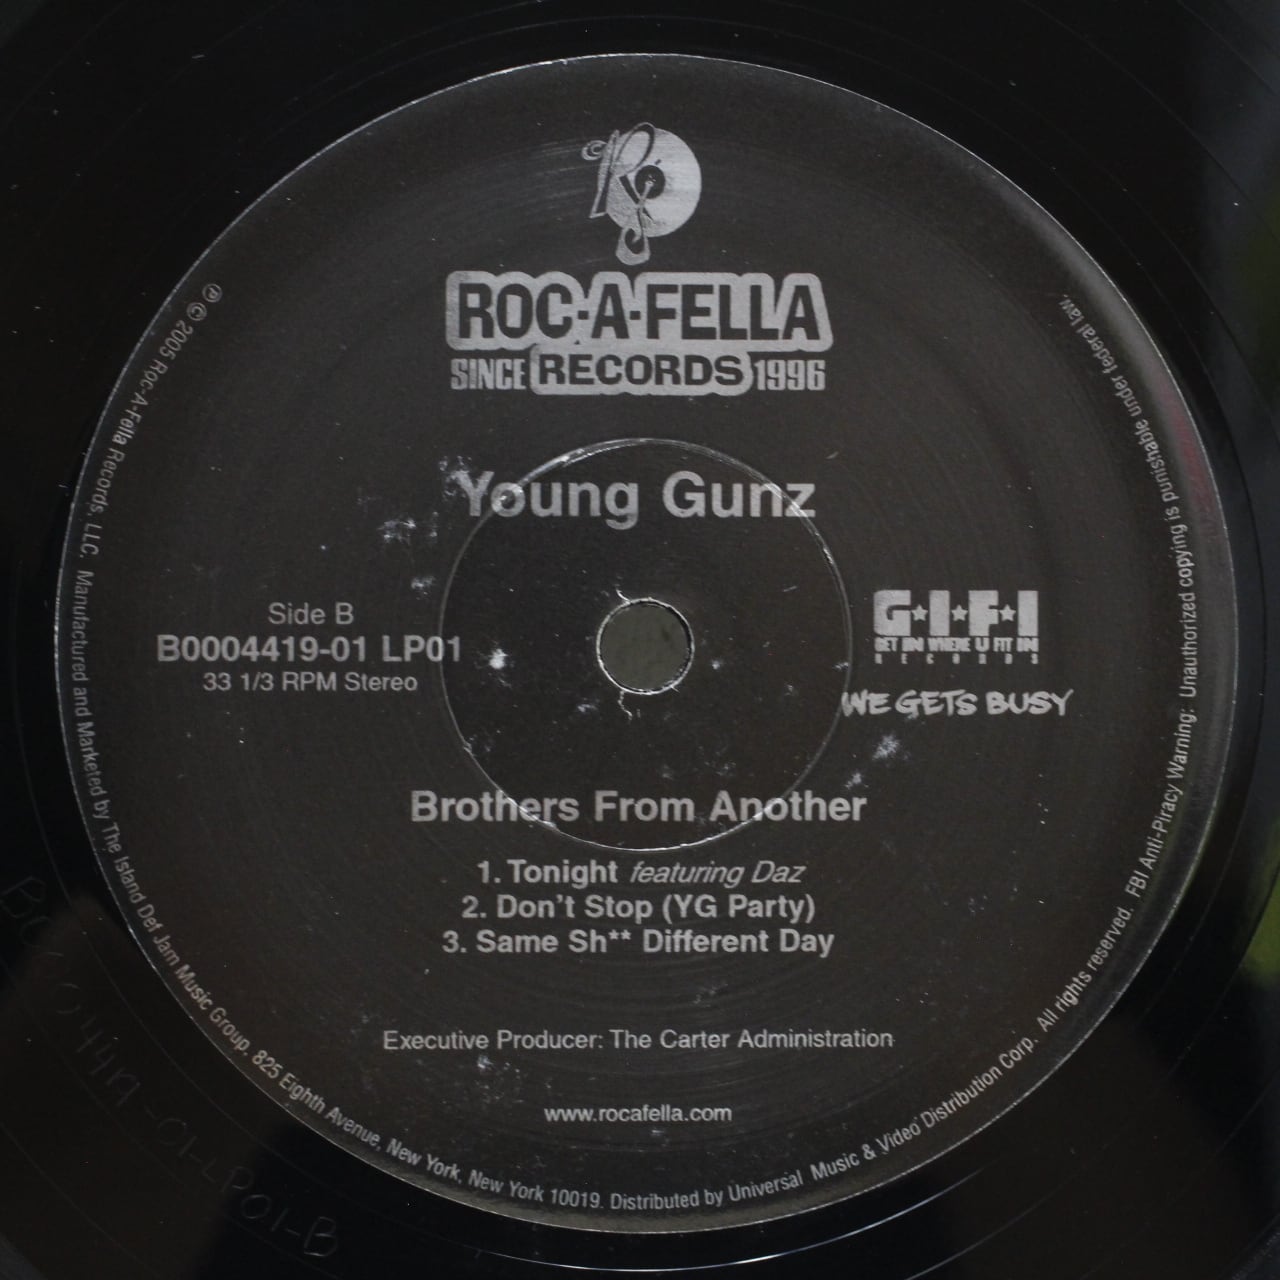 Young Gunz / Brothers From Another [B0004419-01] - 画像4